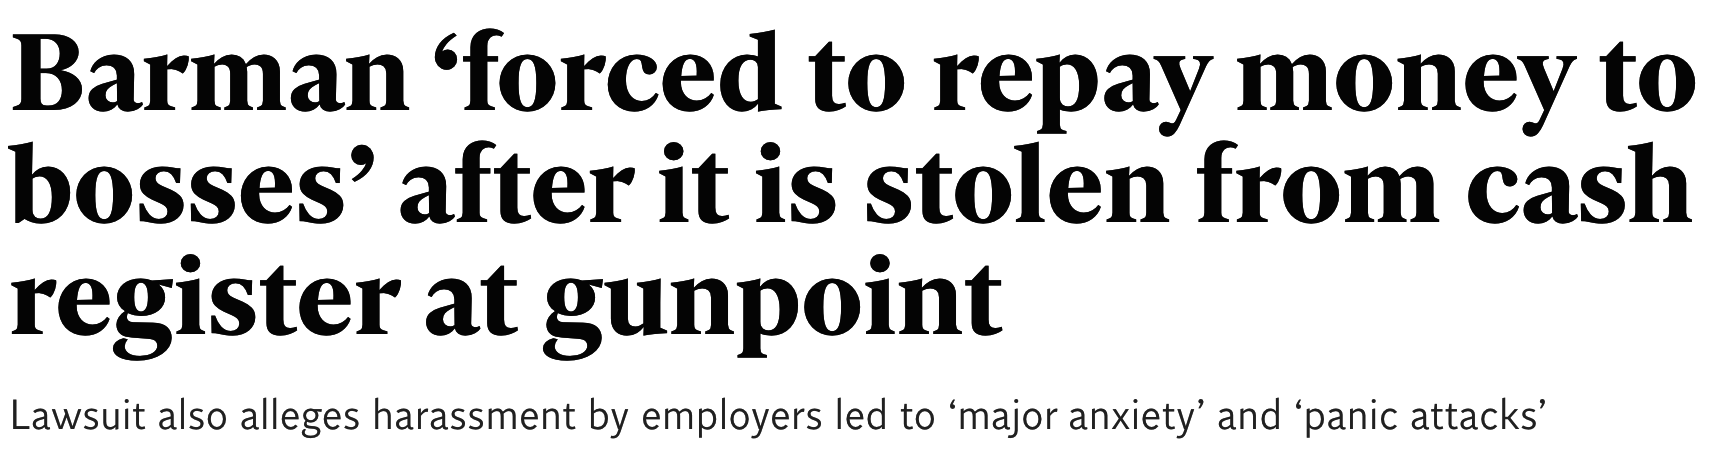 &quot;barman forced to repay money to bosses after it is stolen from cast register at gunpoint: lawsuit also alleges harassment by employers led to &quot;major anxiety&quot; and &quot;panic attacks&quot;